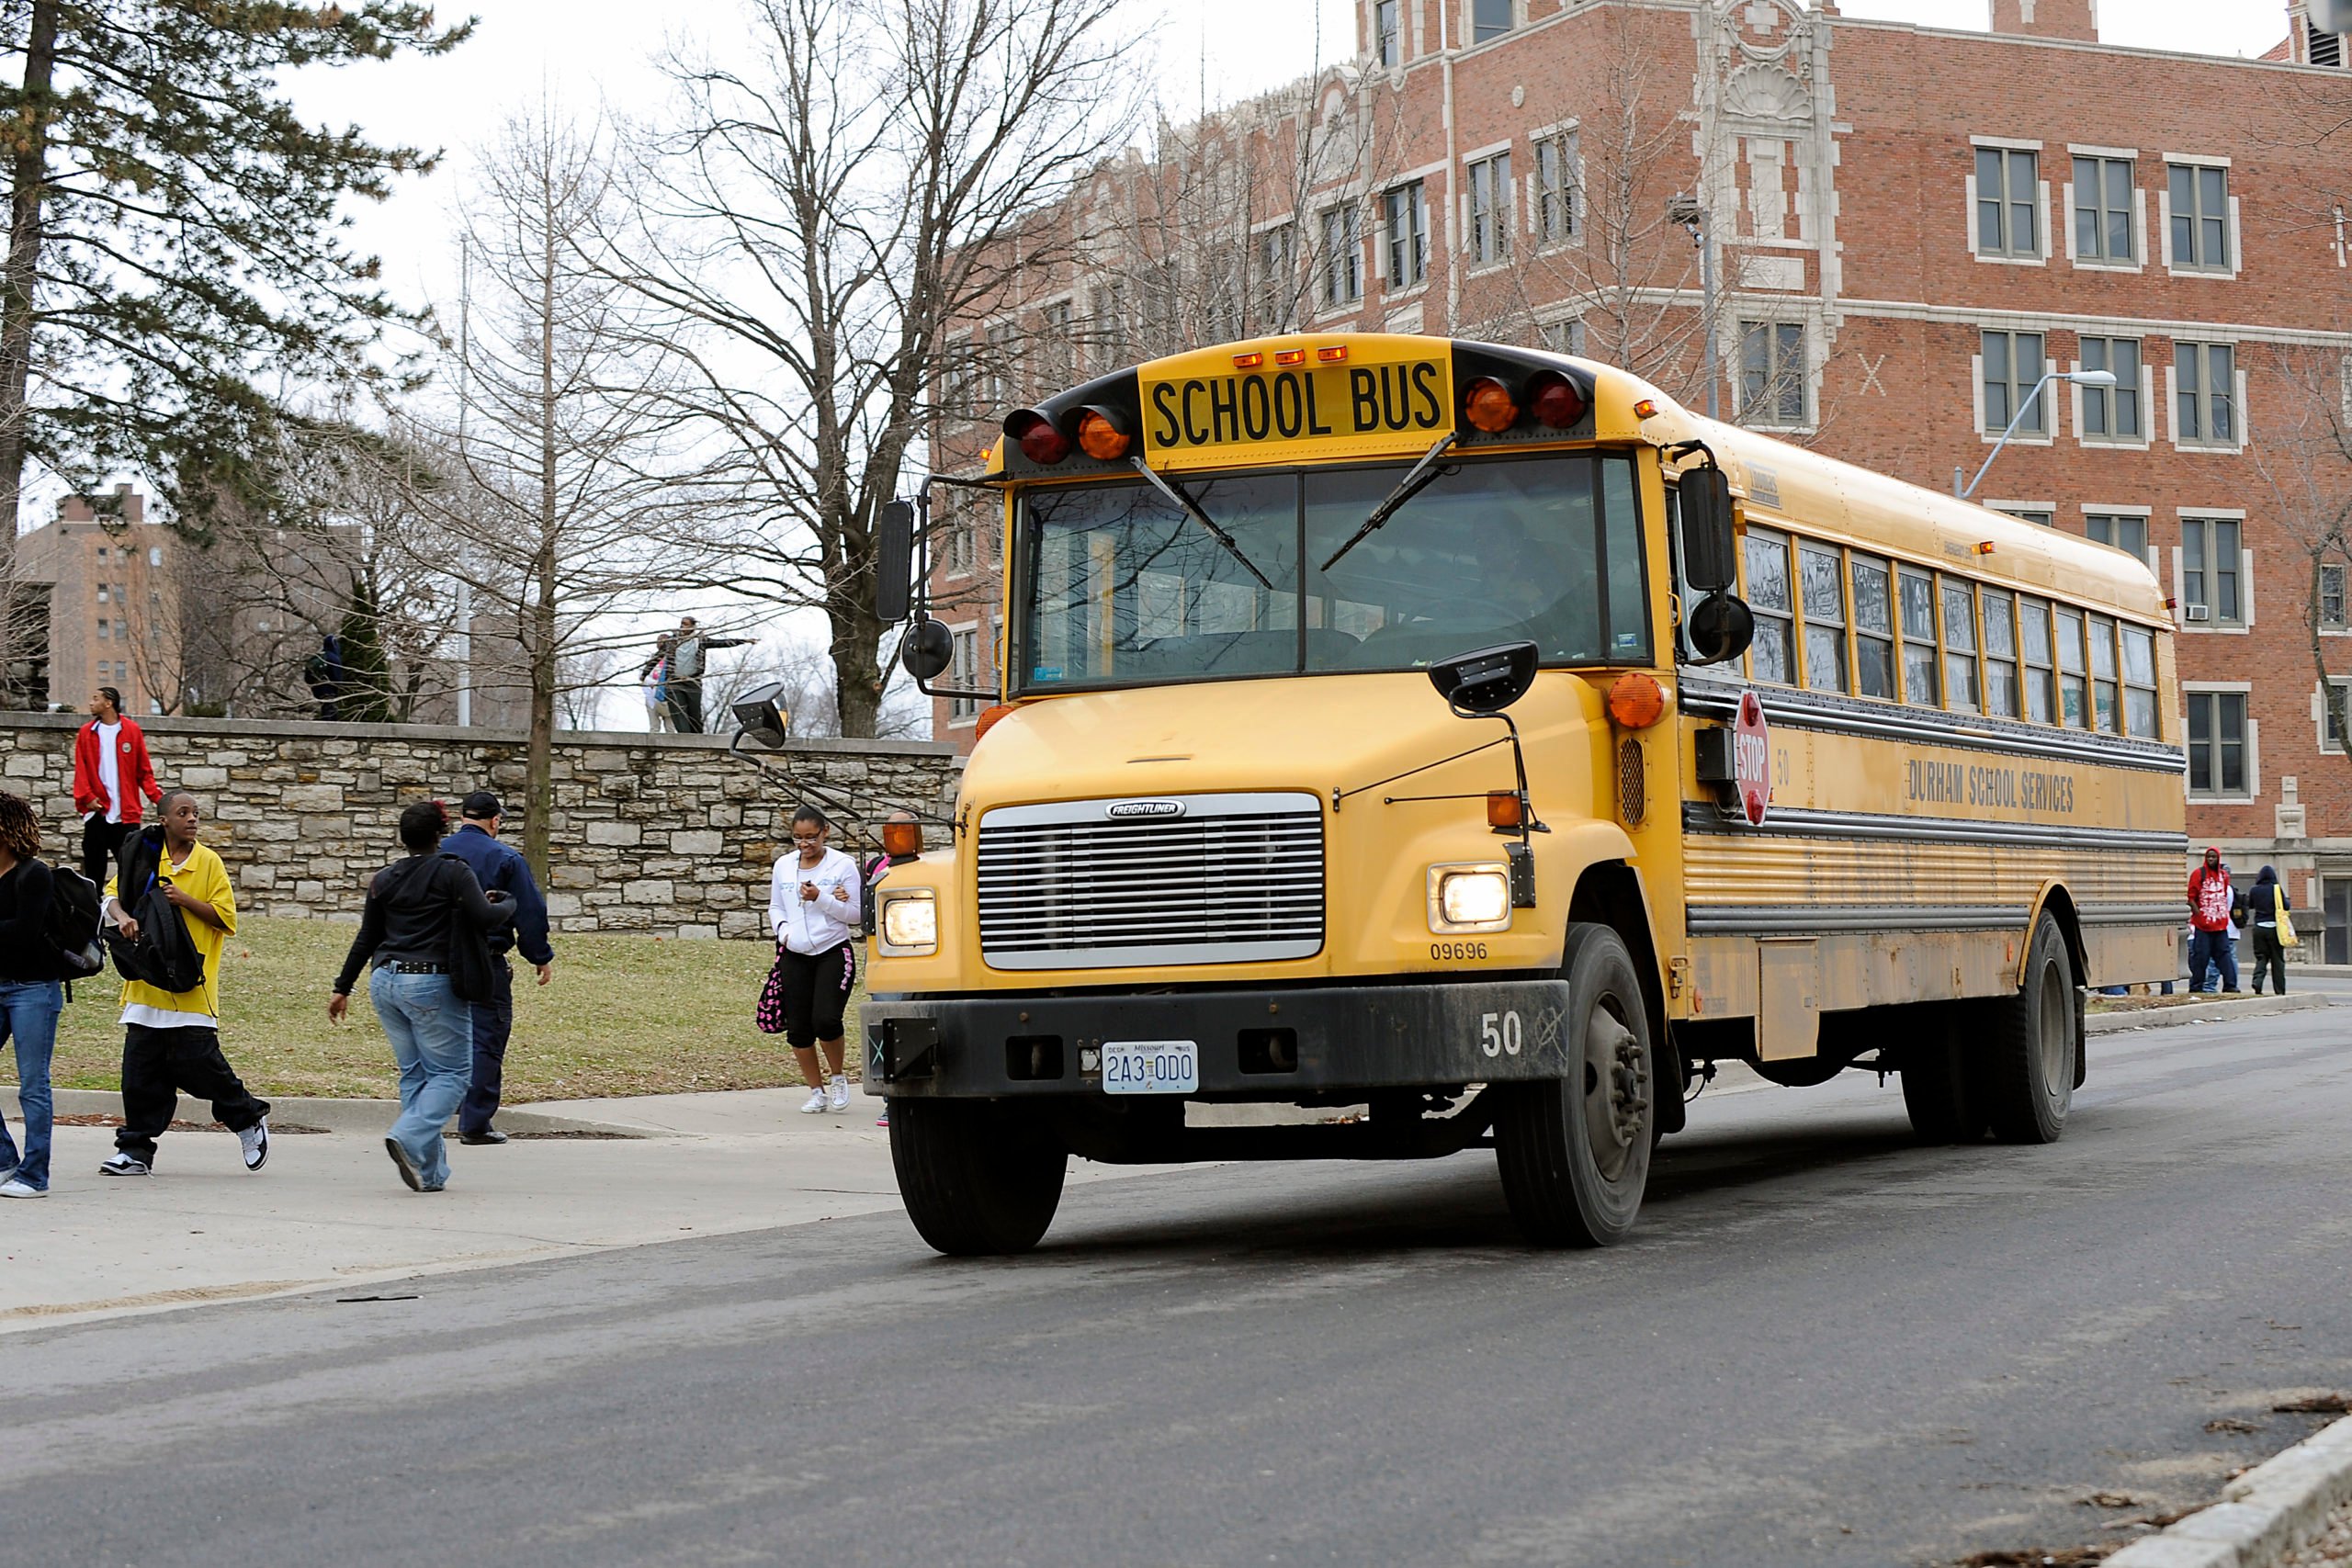 Students prepare to leave on a school bus from Westport High School on March 11, 2010 in Kansas City, Missouri. The High School is among 29 in a district of 61 schools that will close due to the new budget plan that is making the cuts to ward off bankruptcy. (Photo by G. Newman Lowrance/Getty Images)